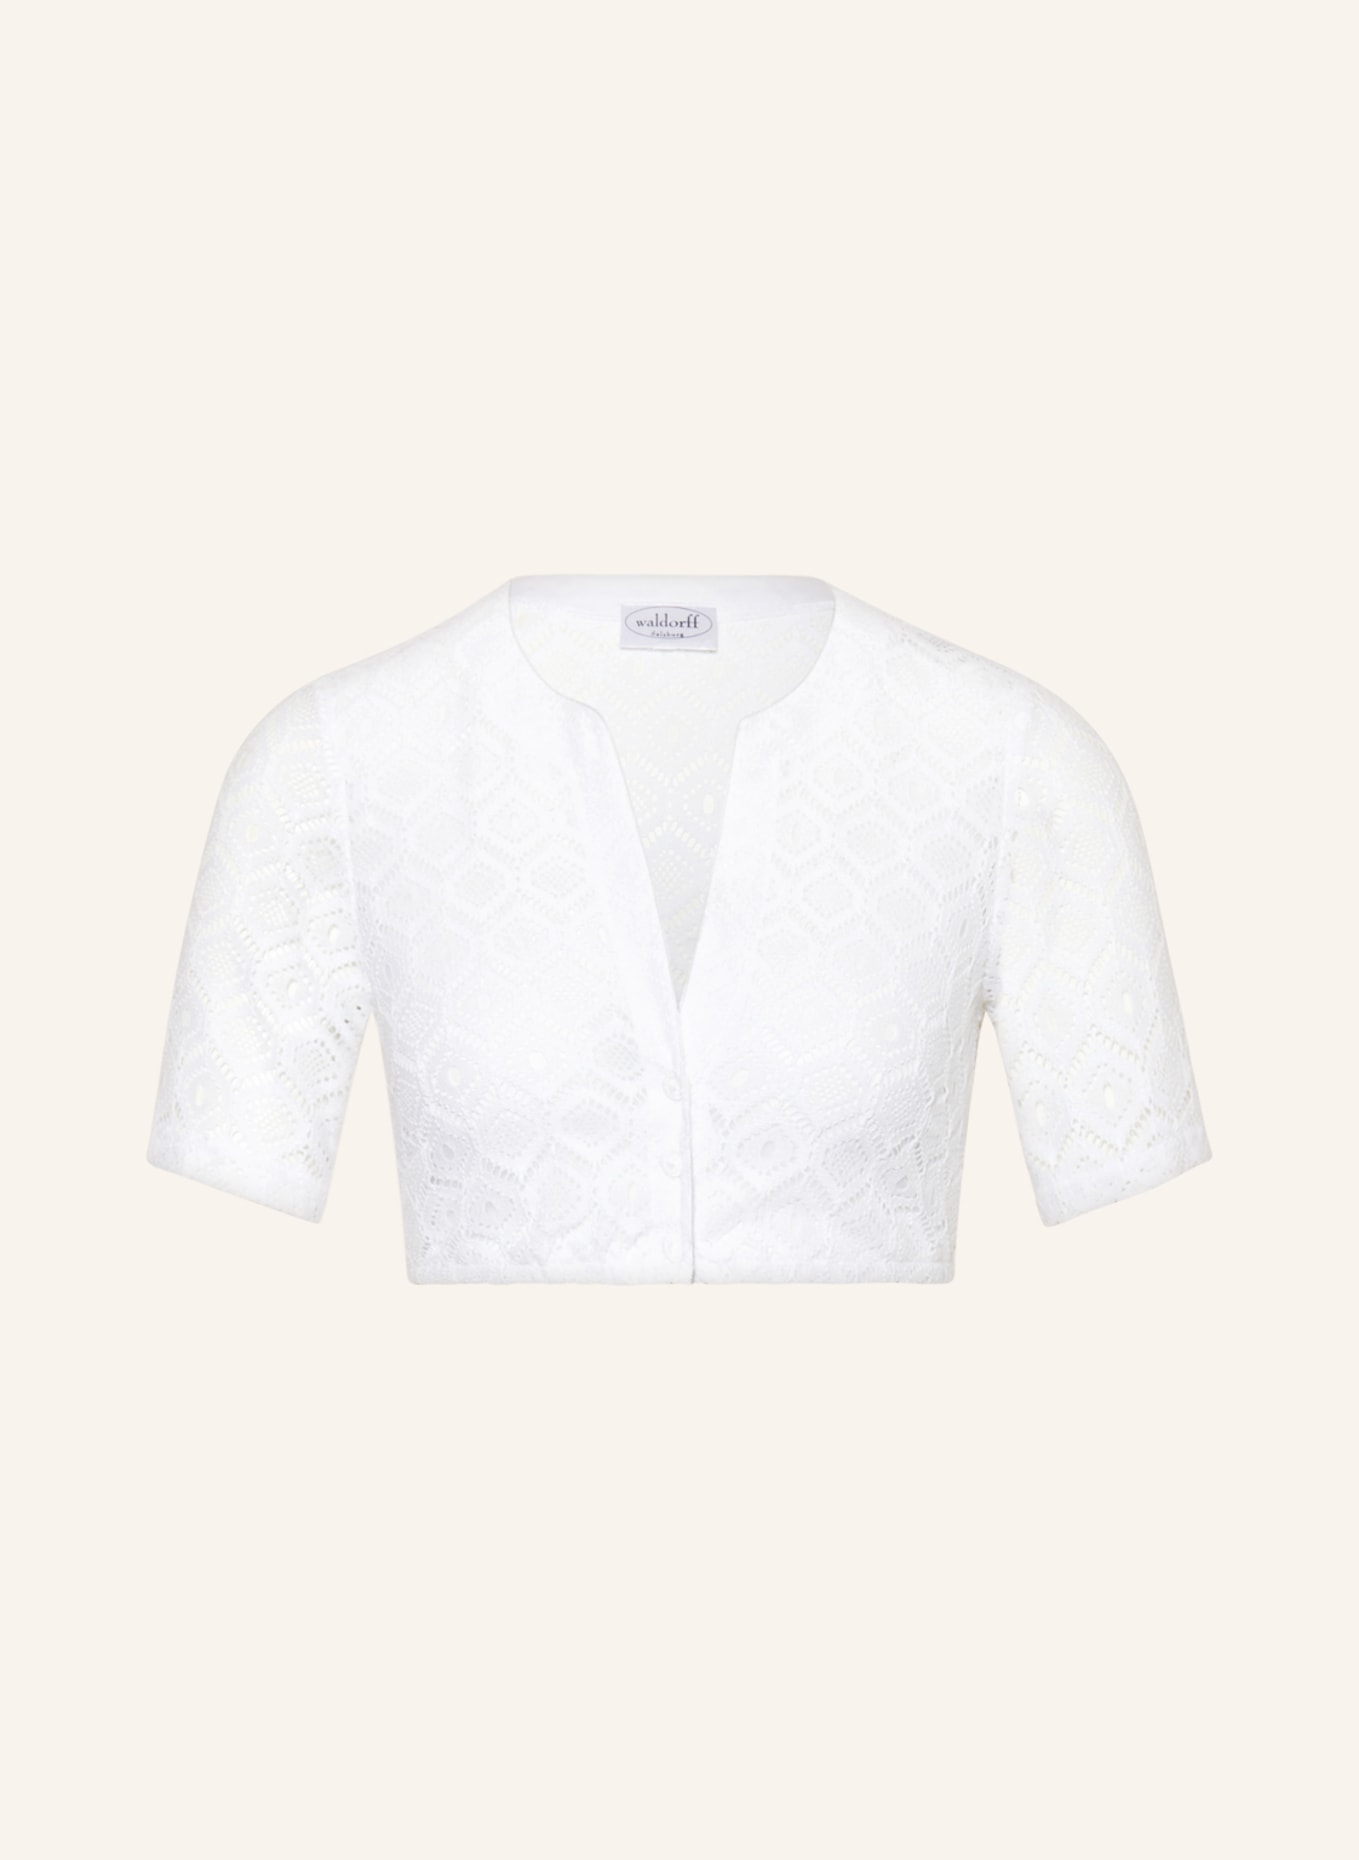 WALDORFF Dirndl blouse made of lace, Color: WHITE (Image 1)